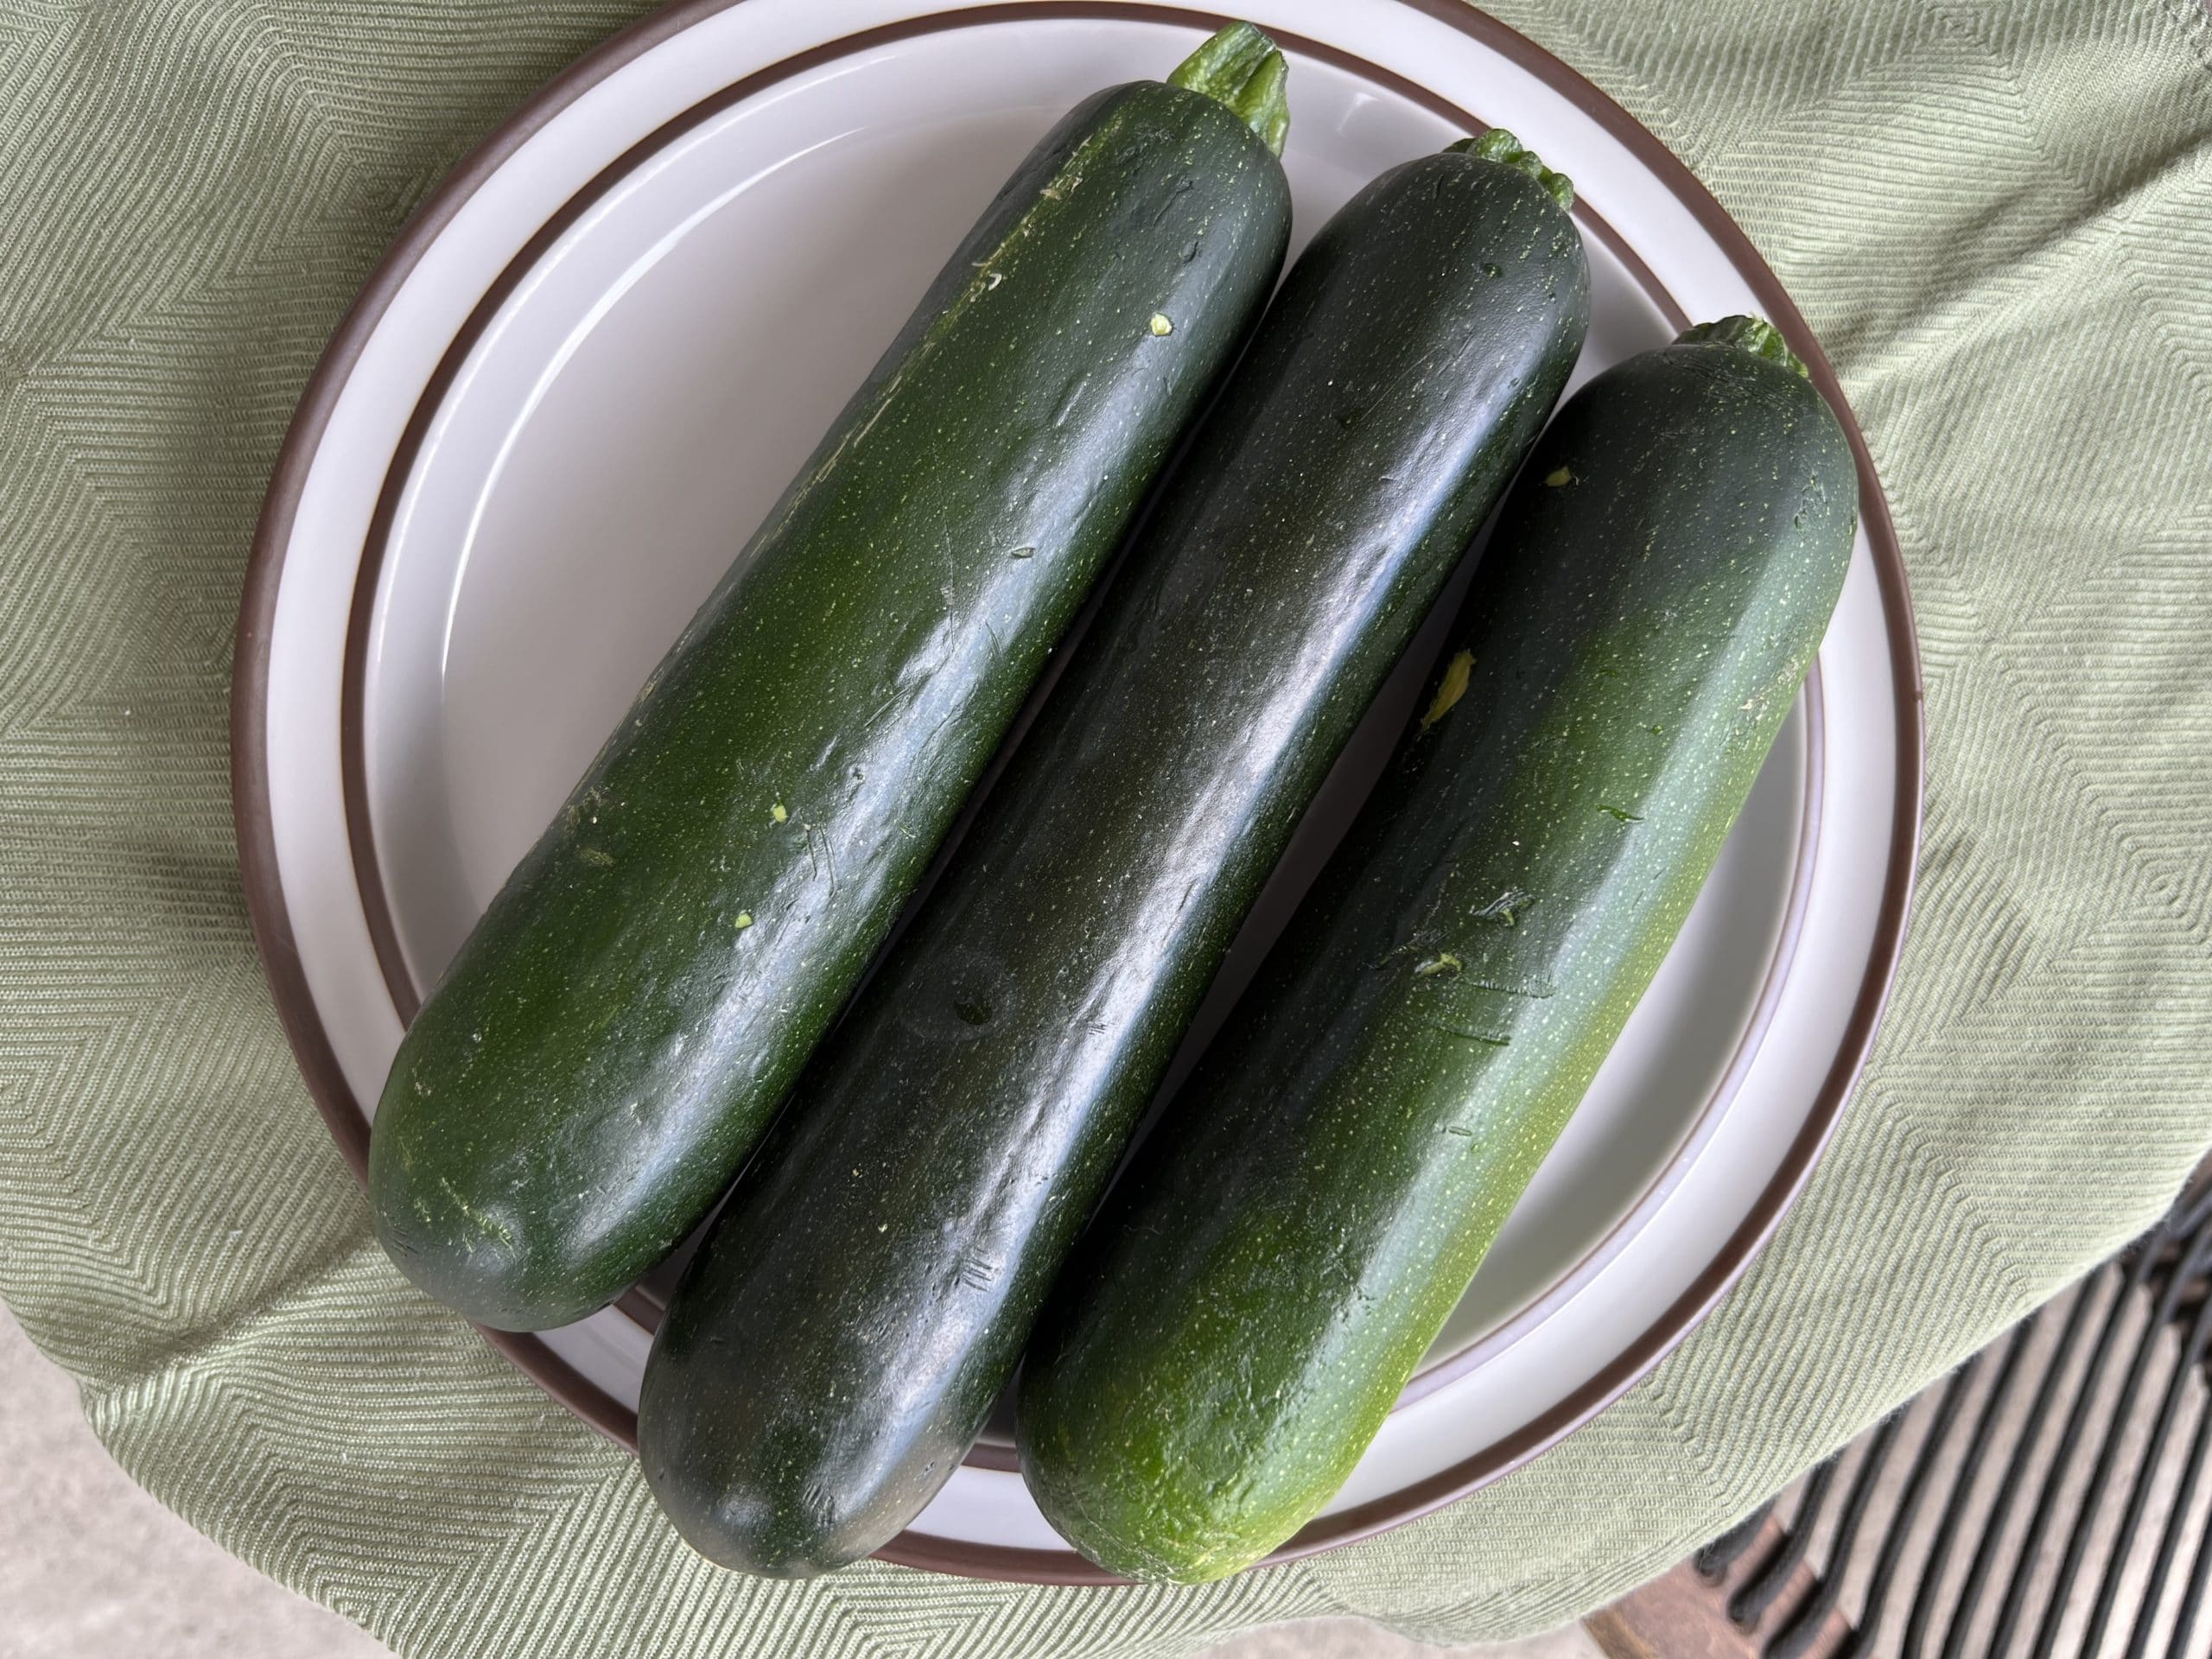 can one eat raw zucchini